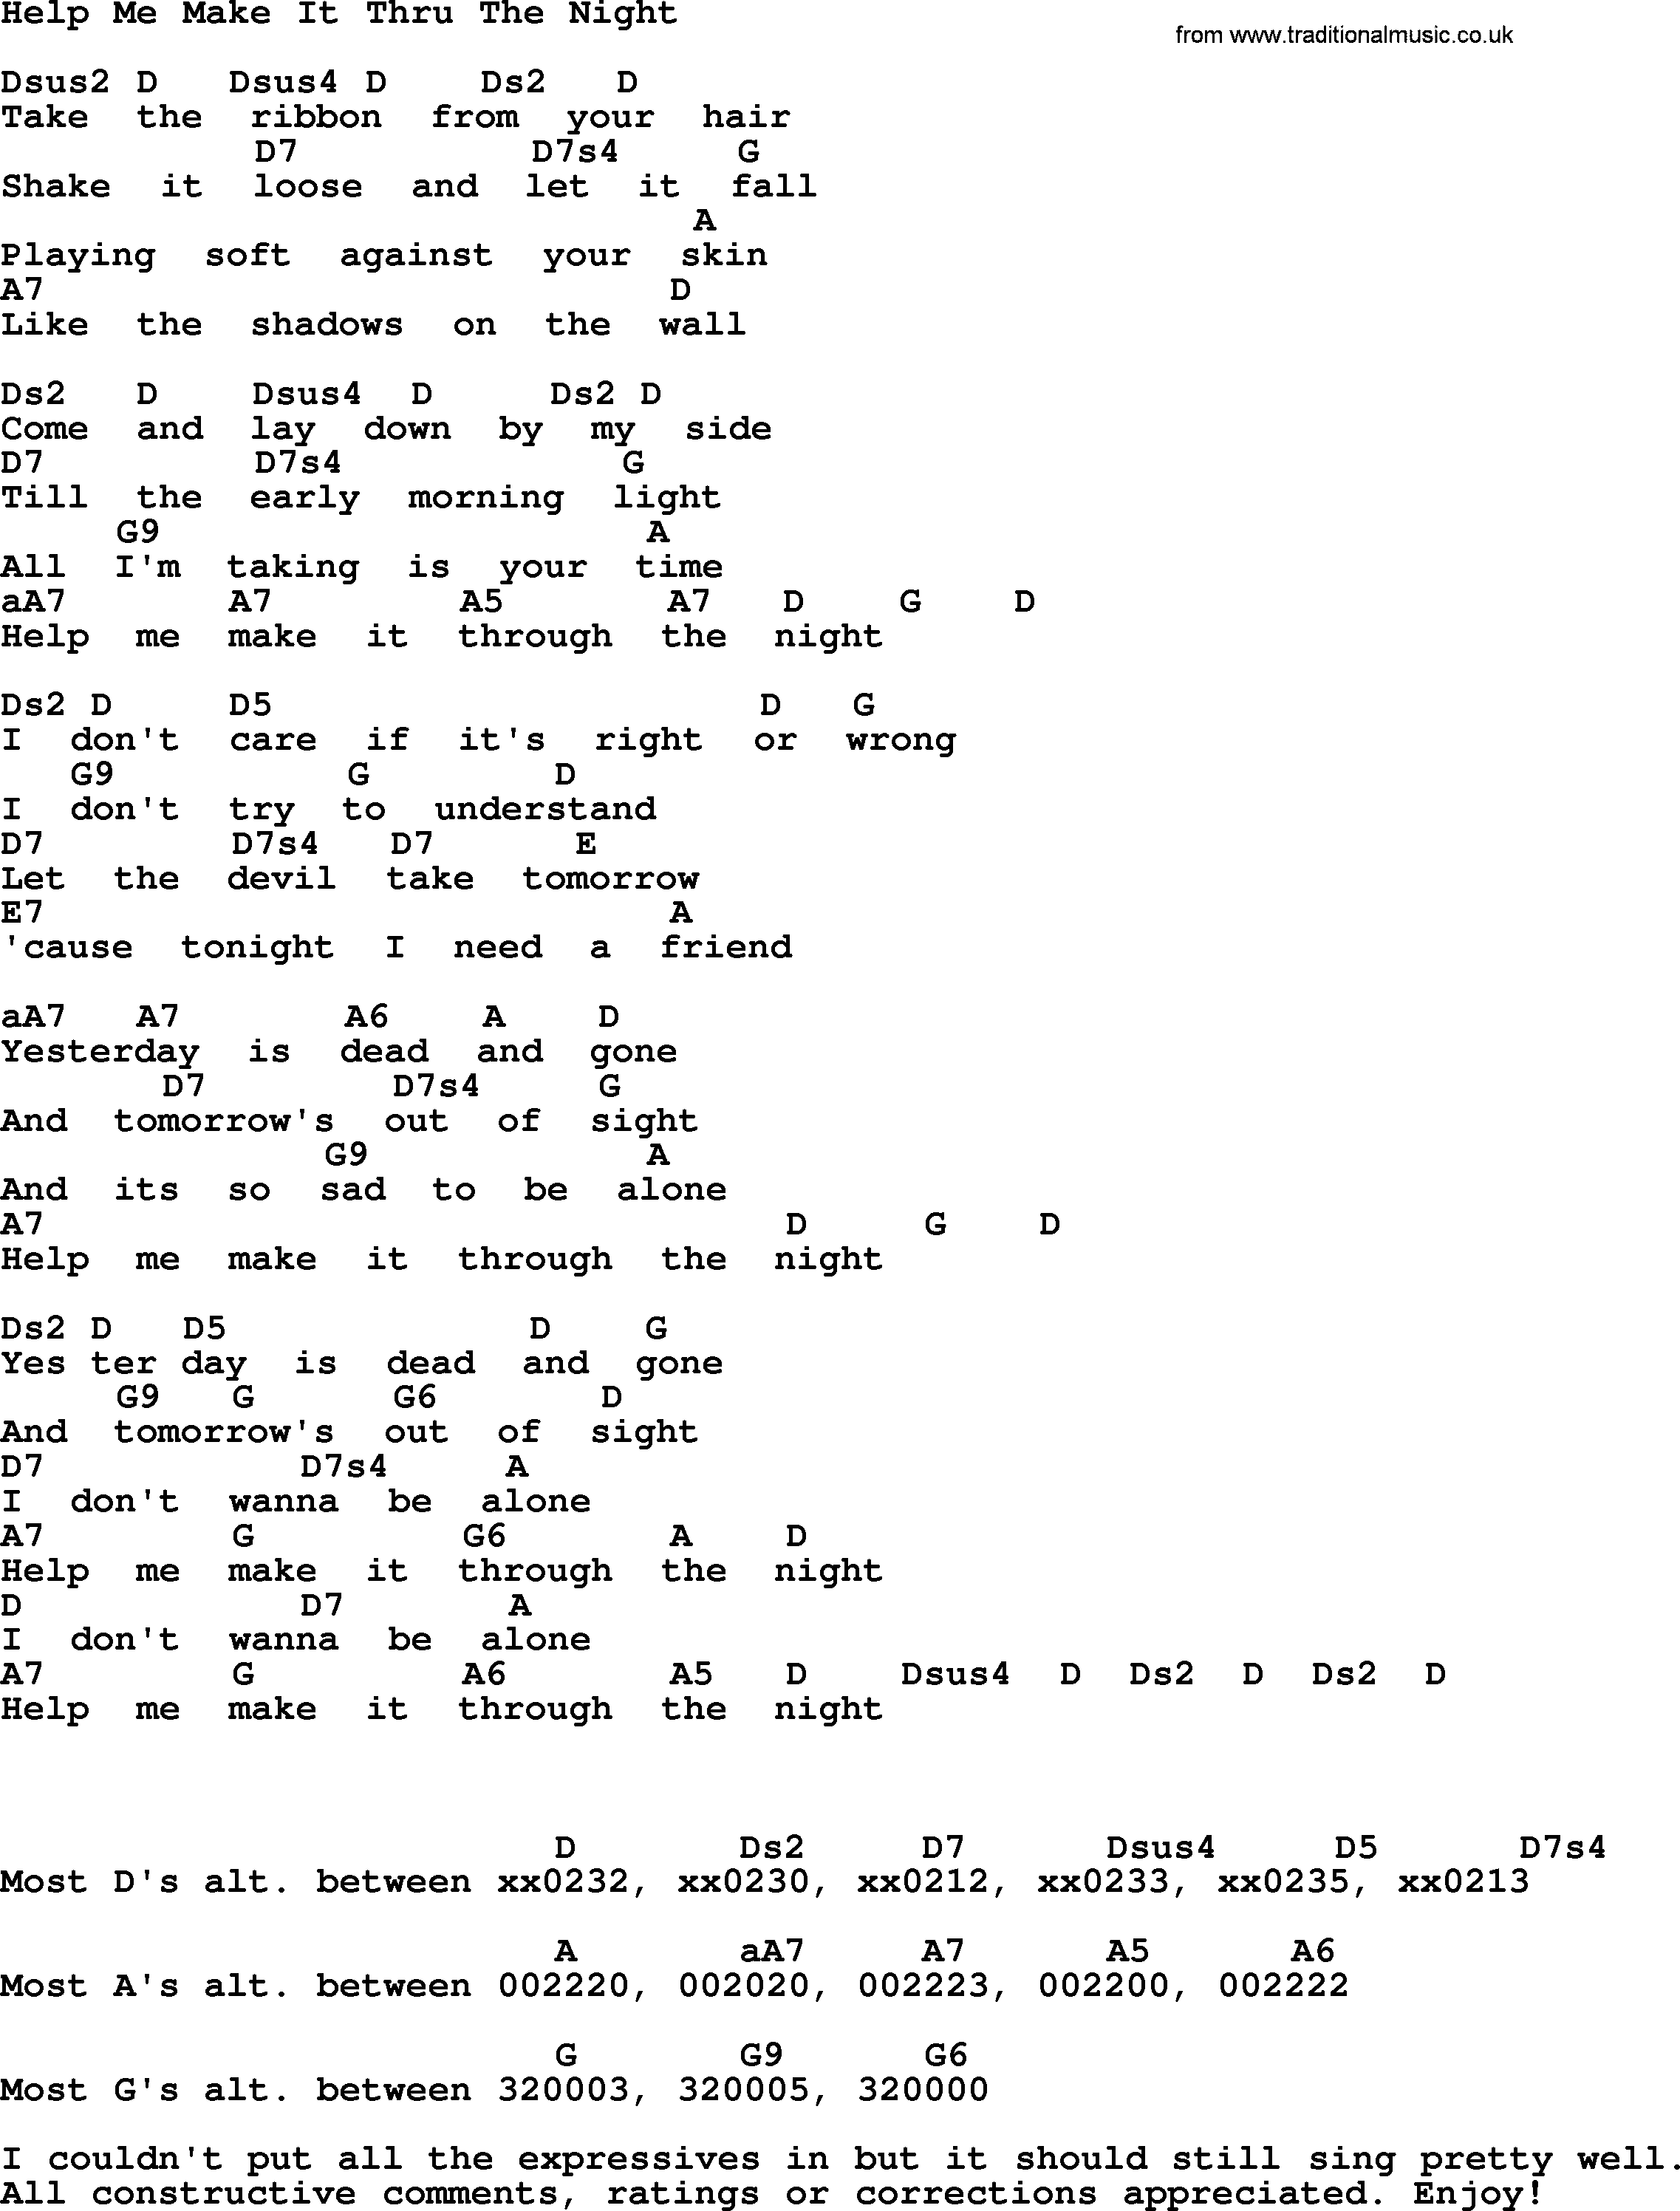 Willie Nelson song: Help Me Make It Thru The Night(2), lyrics and chords